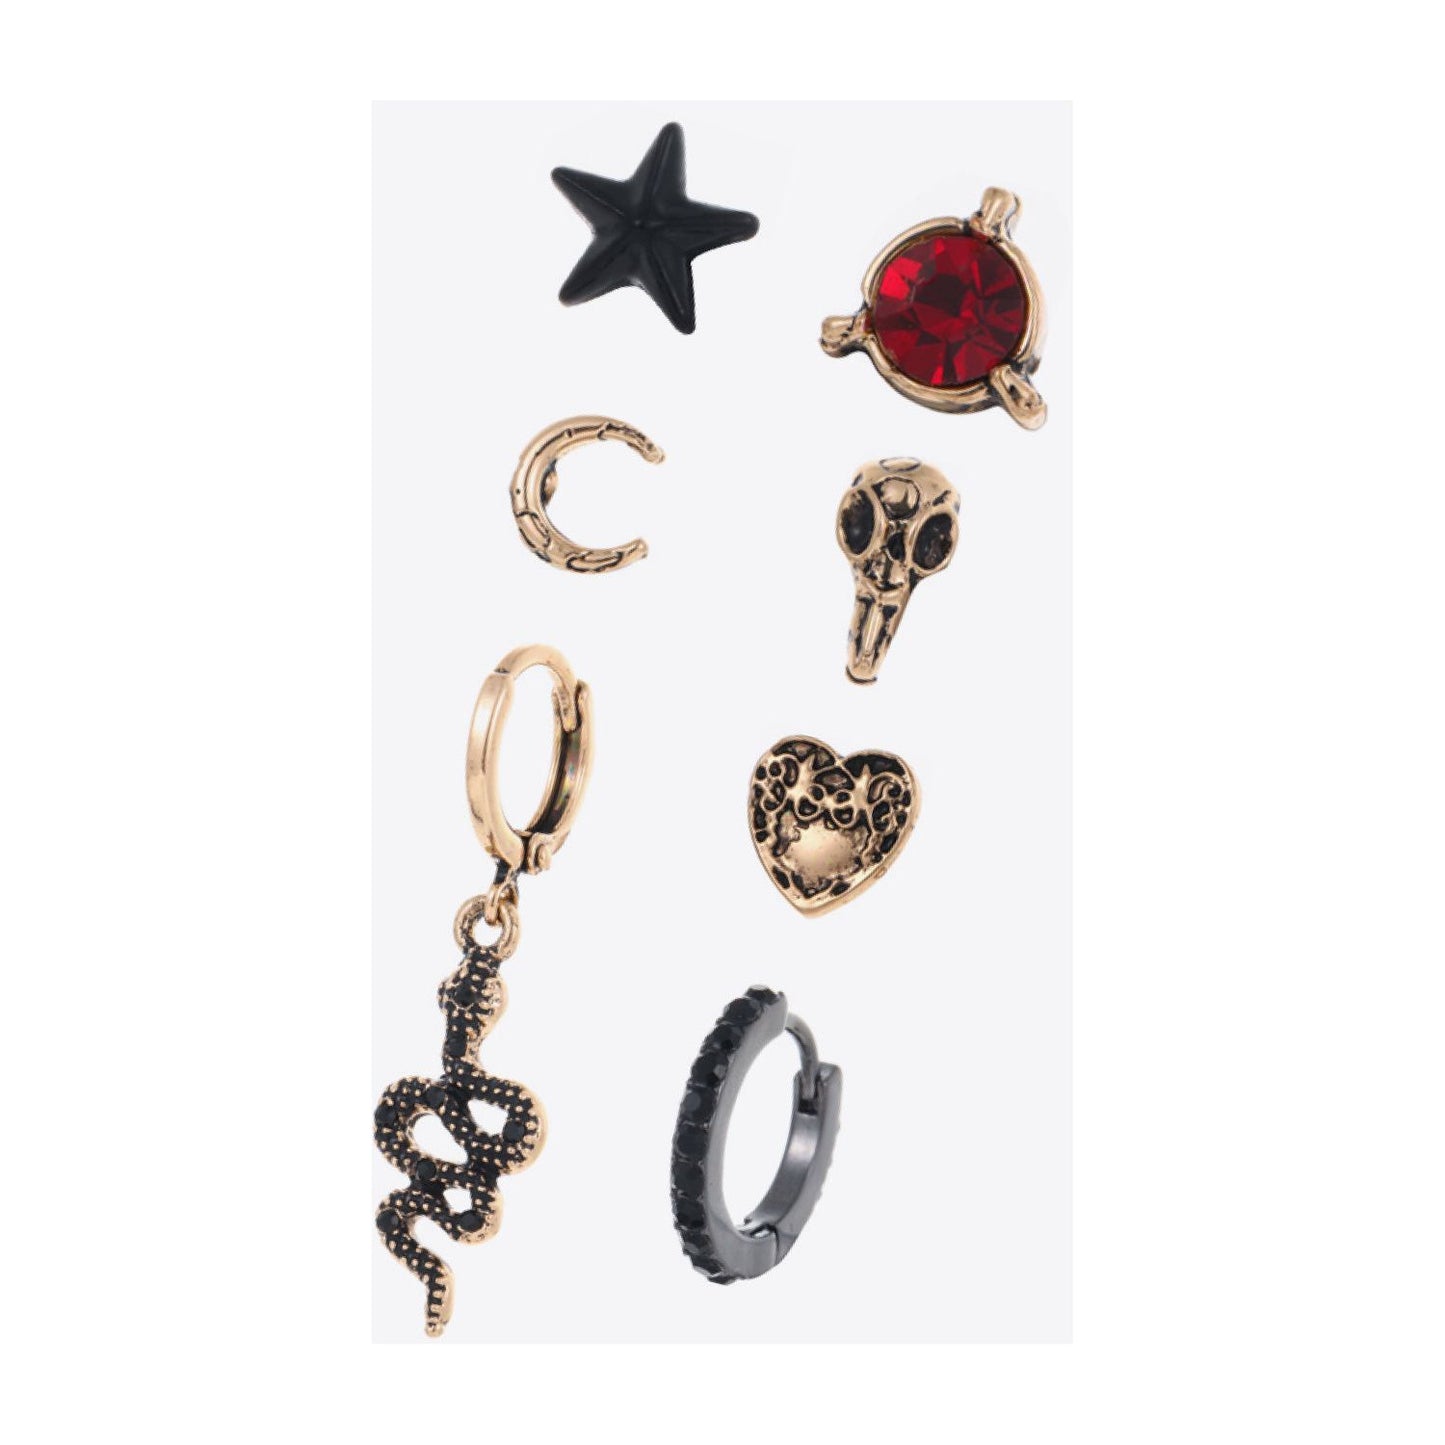 7-Piece Mismatched Earrings